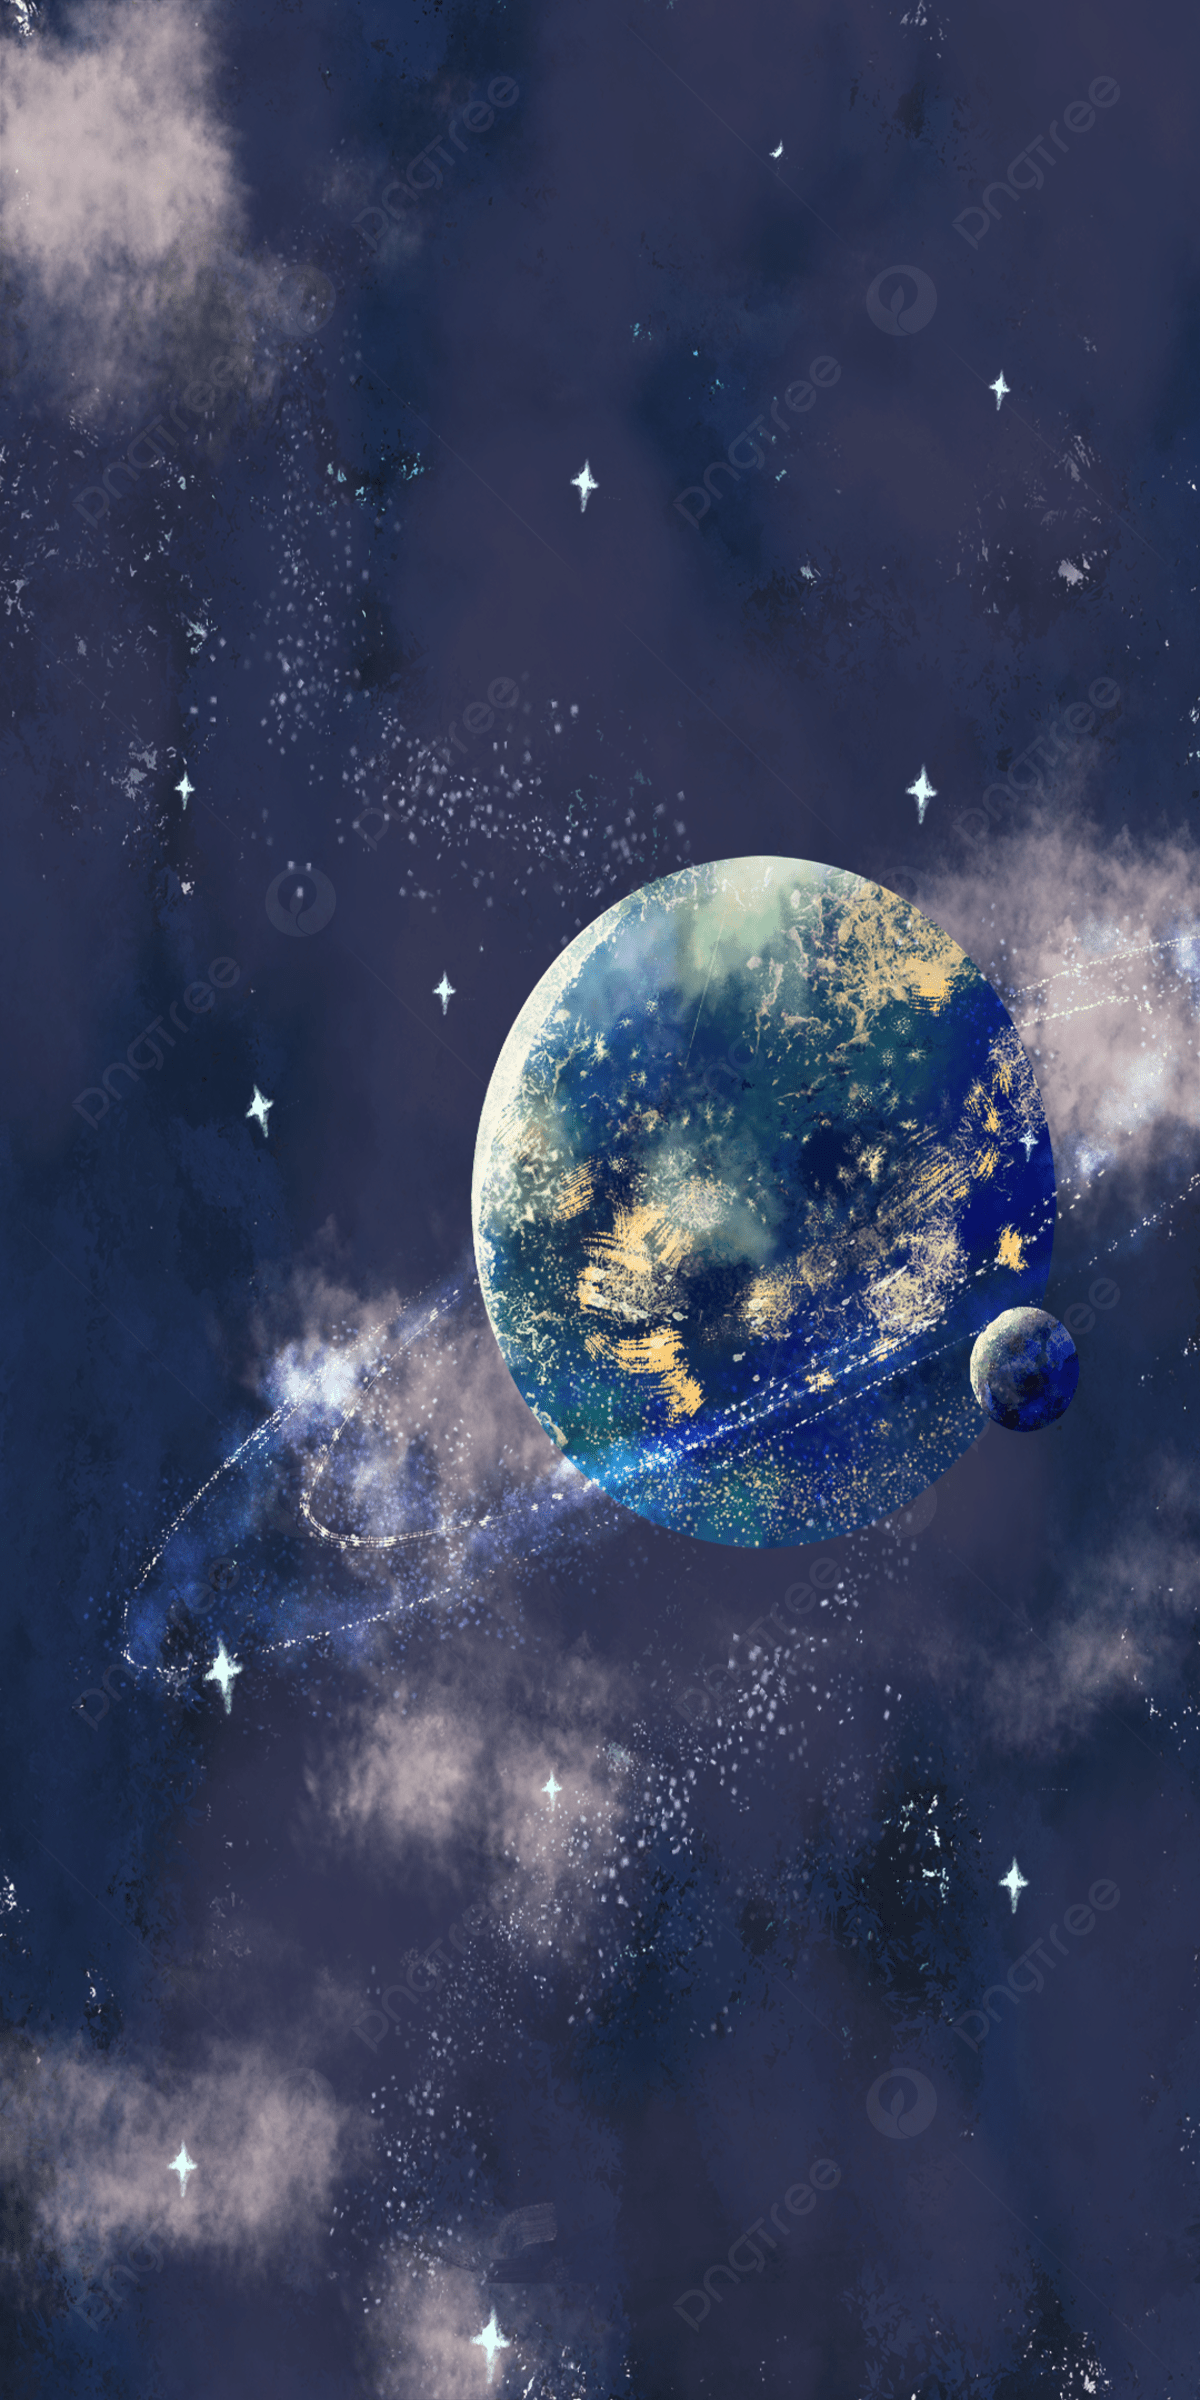 Blue Planet Watercolor Cosmic Mobile Phone Wallpaper Background, Constellation, Clouds, Star Background Image for Free Download